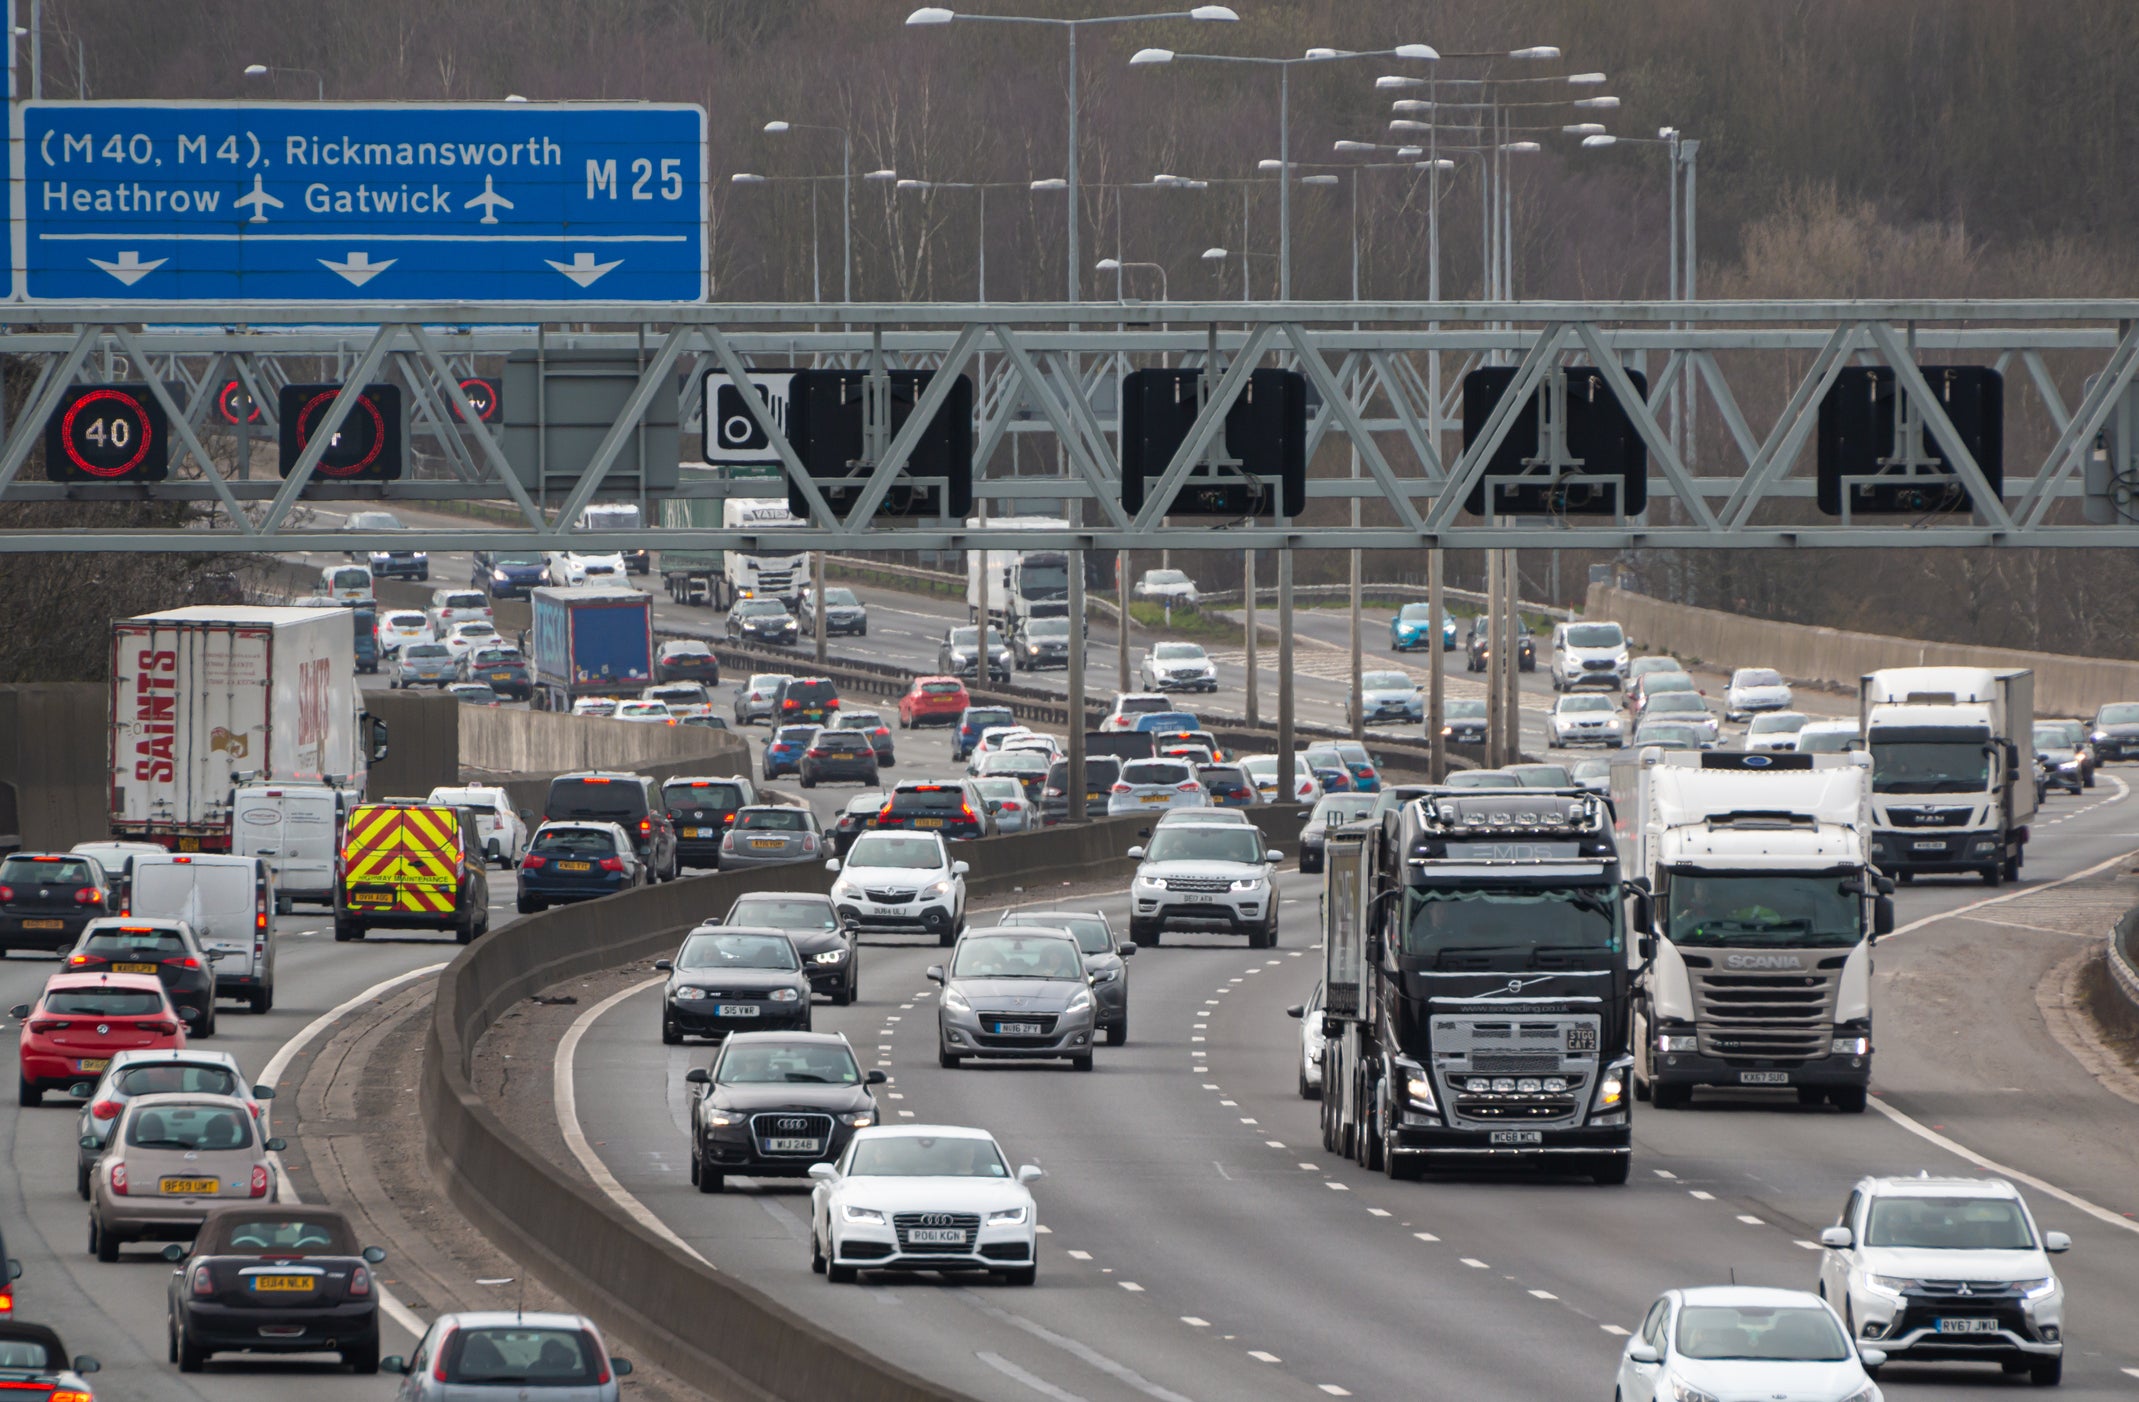 The M25 between Junction 10 and Junction 11 will be shut in both directions from 9pm Friday